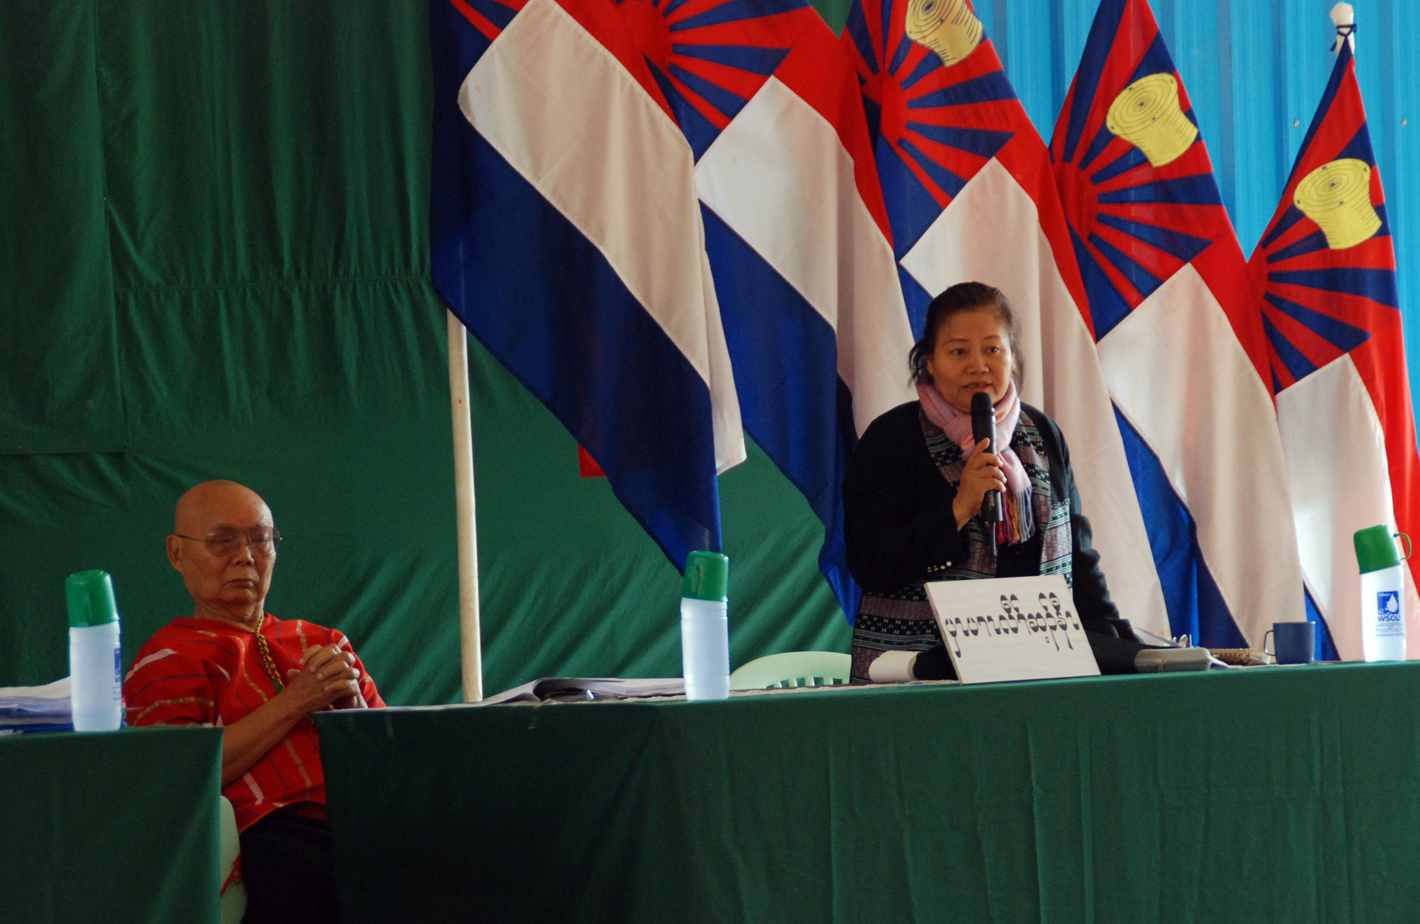 KNU leader, Chairman Gen Mutu Say Poe (left), and leader of the internal KNU opposition, previous Vice-Chairman Naw Zipporah Sein (right). Photo: David Brenner